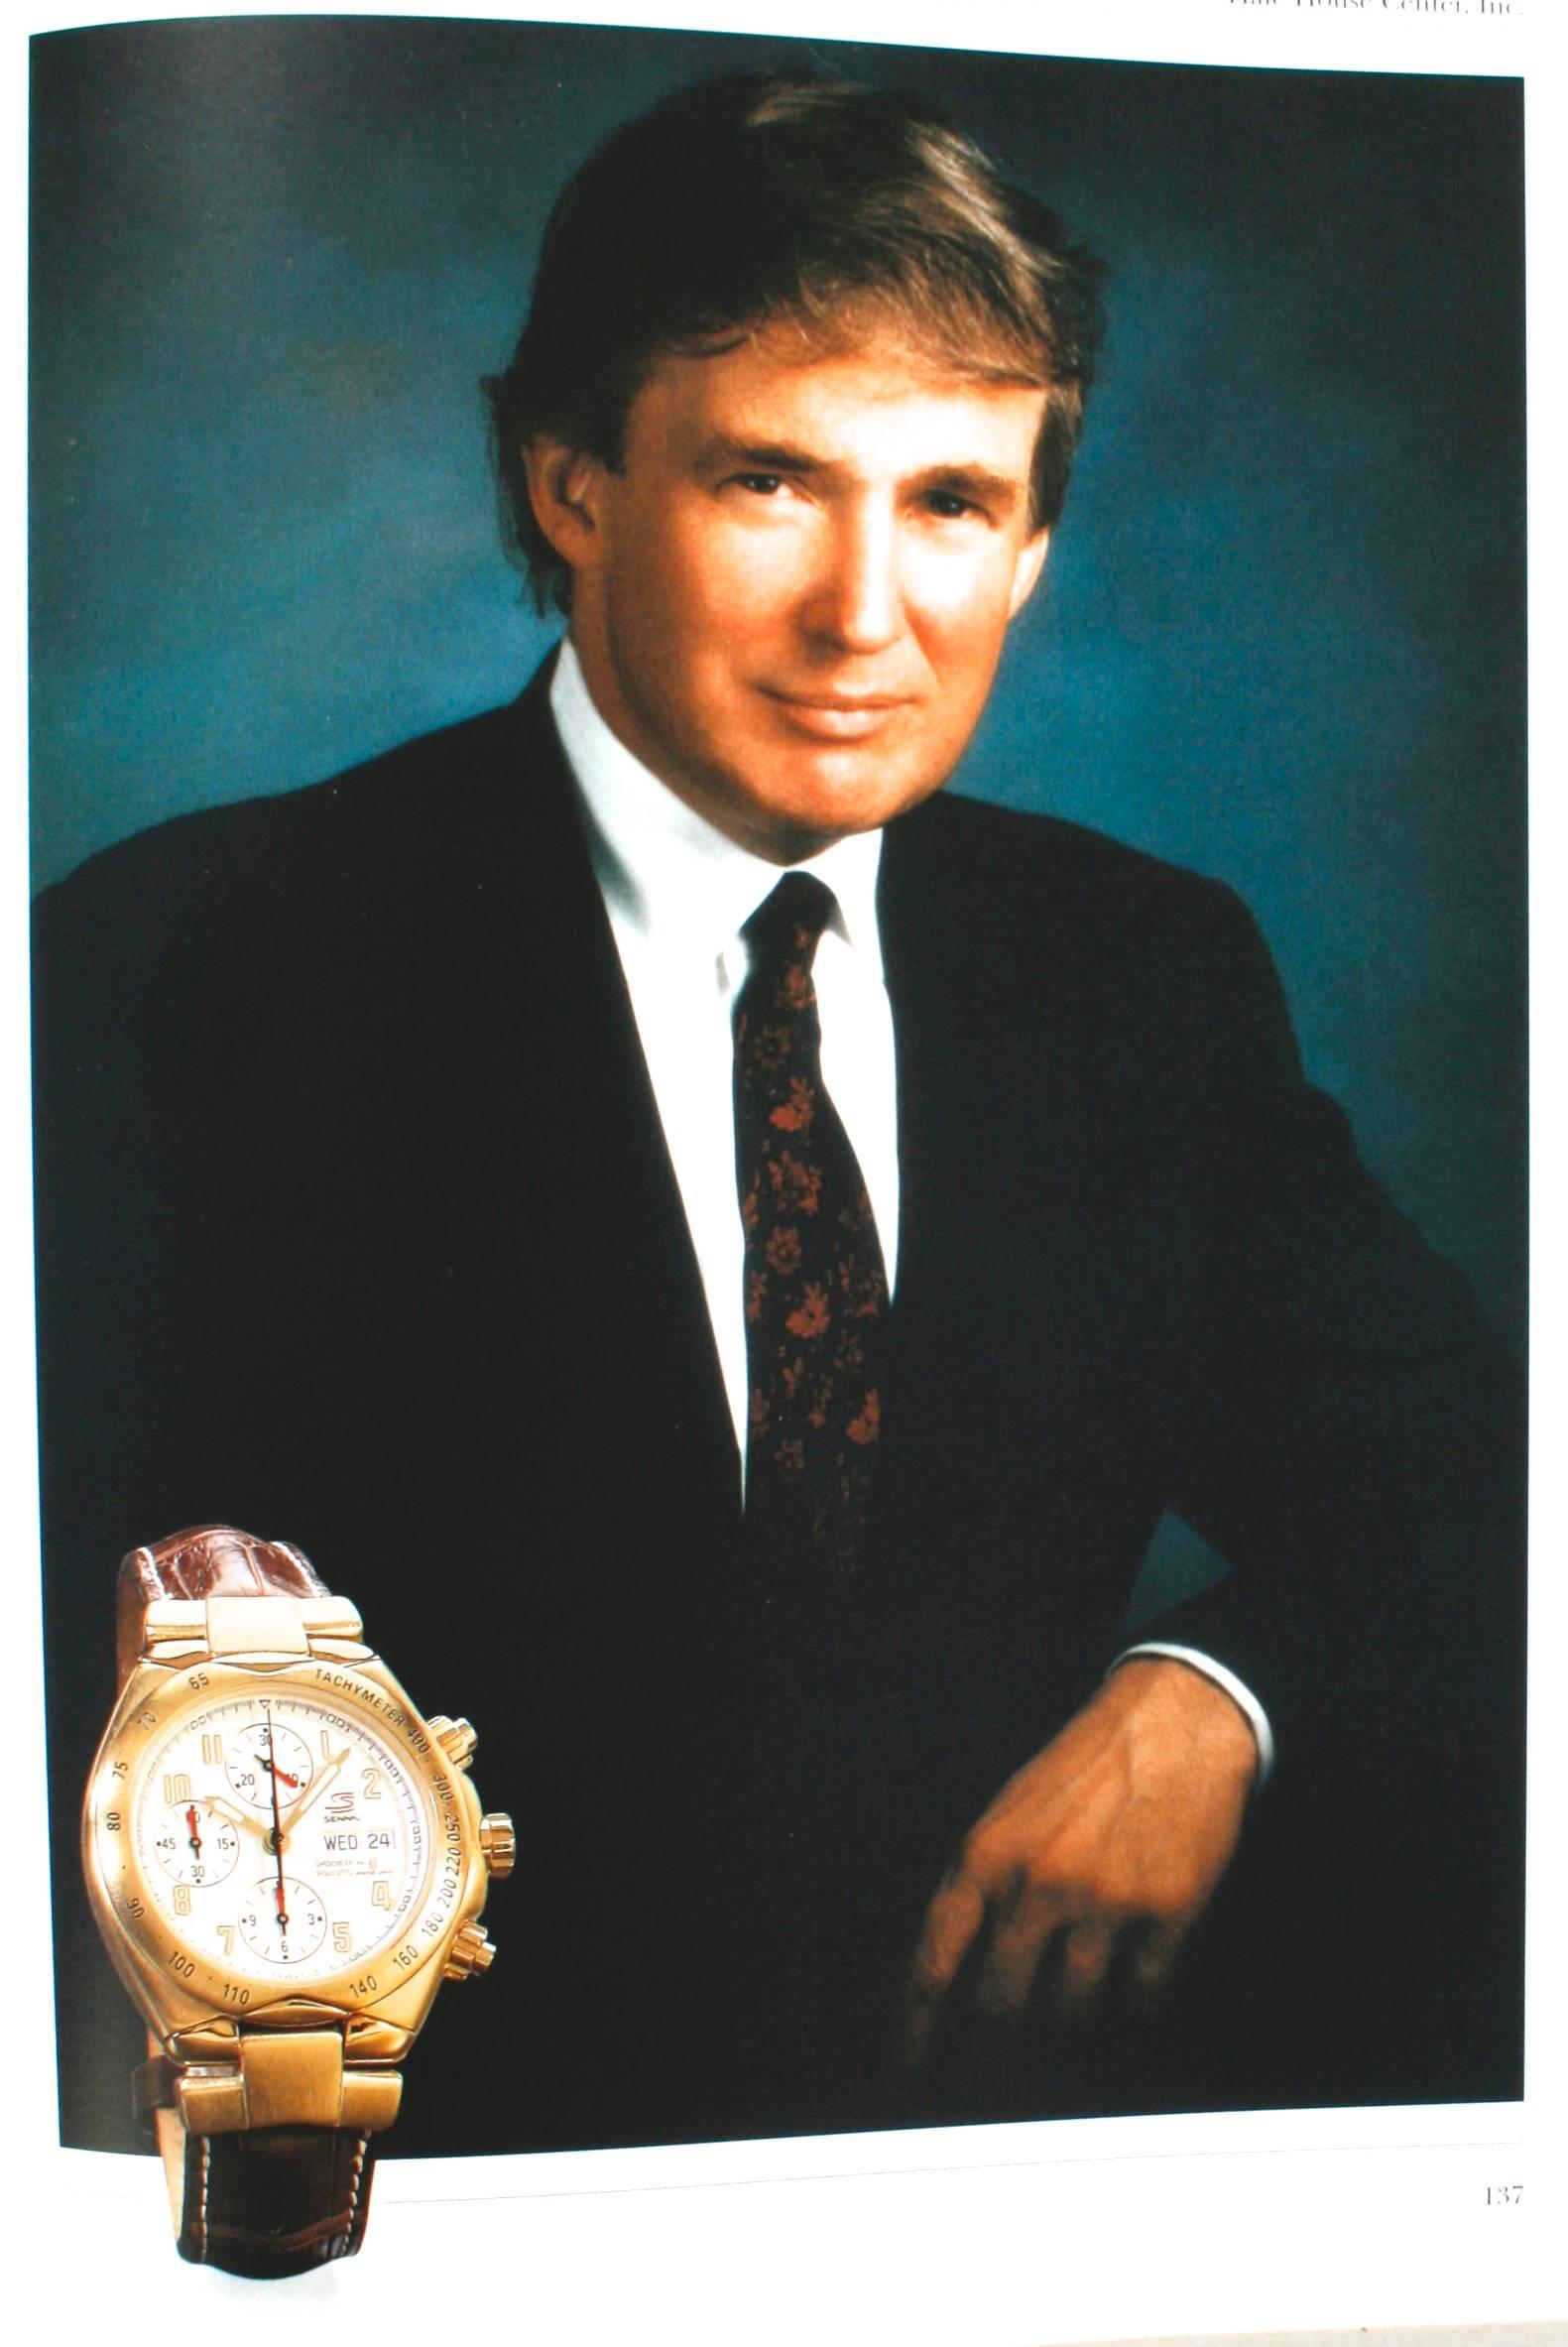 Catalogue from Famous Faces Watch Auction for Charity, New York City February 24, 1999. New York: Antiquorum Editions, 1999. Soft cover, 237 pp. A star studded auction catalogue of watches owned or selected by stars of film, tv, radio, music, and